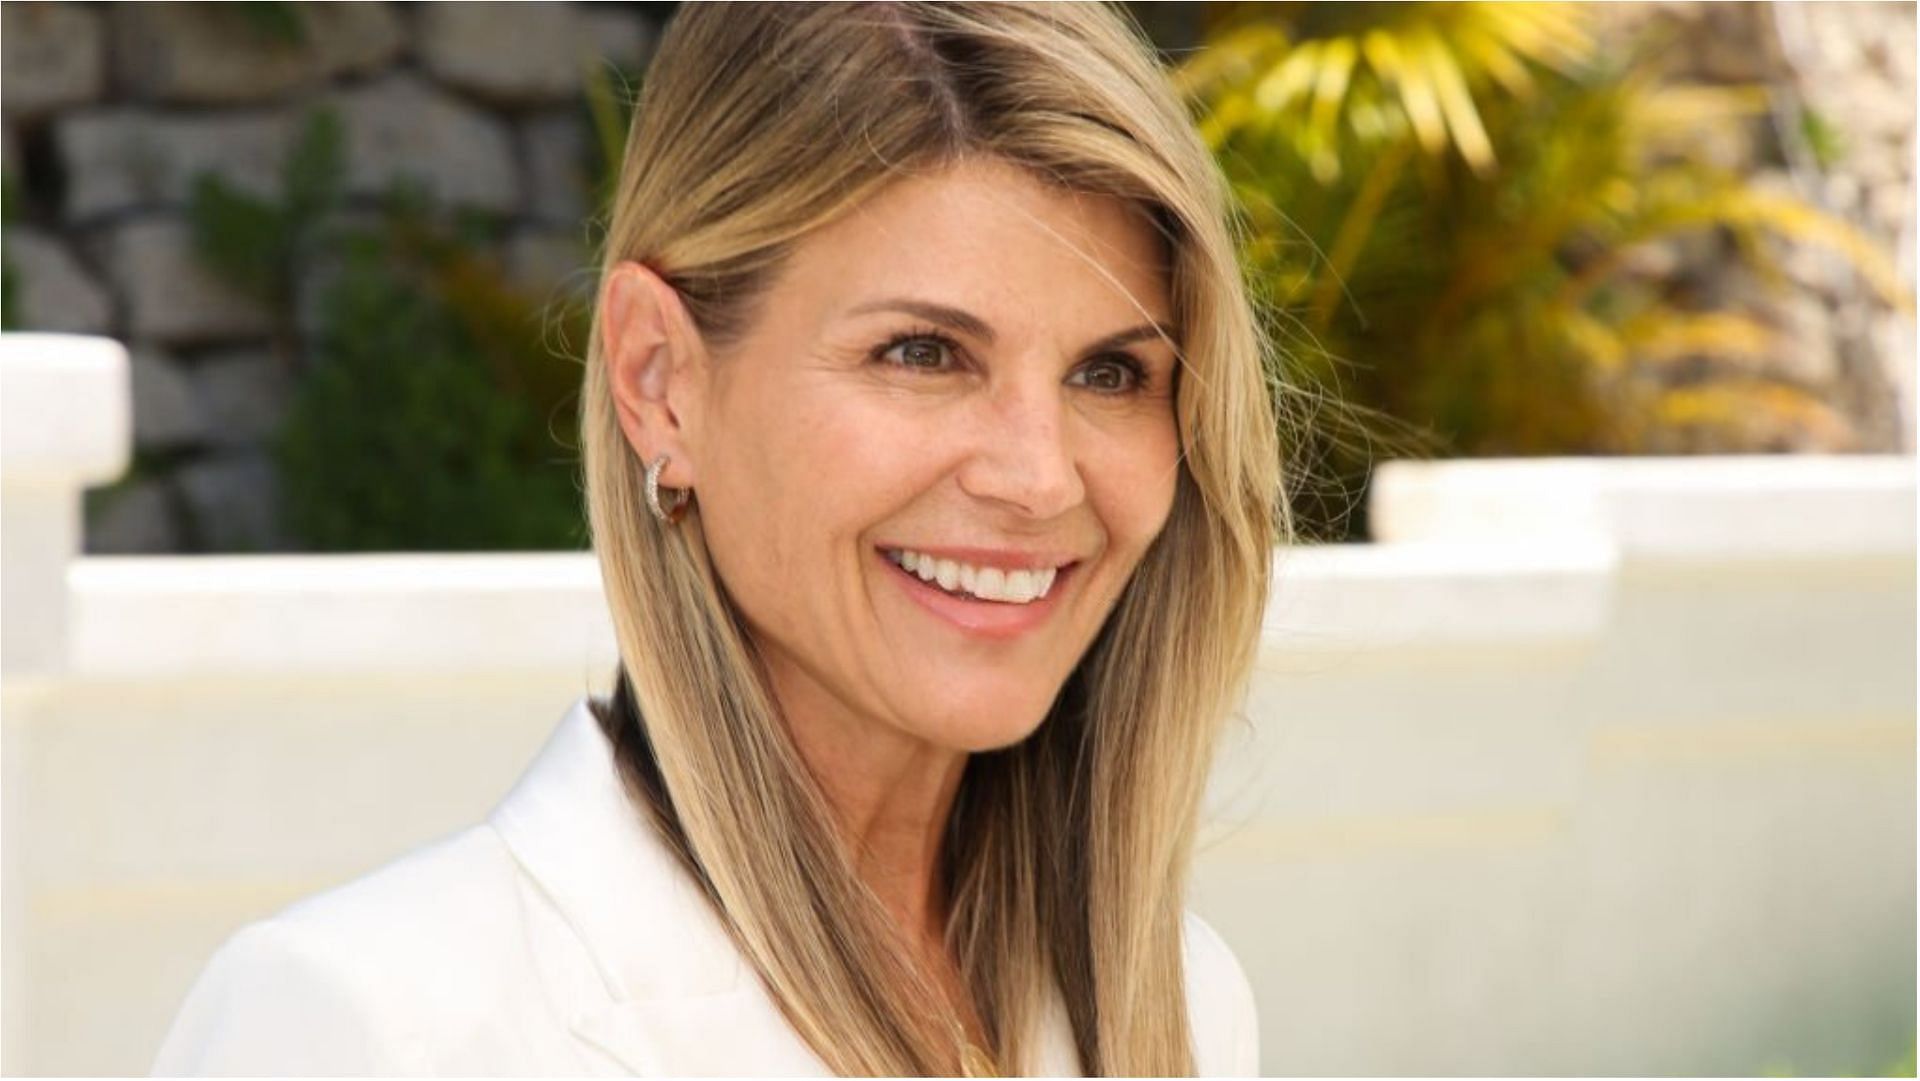 Lori Loughlin was indicted in 2019 along with her husband (Image via Paul Archuleta/Getty Images)